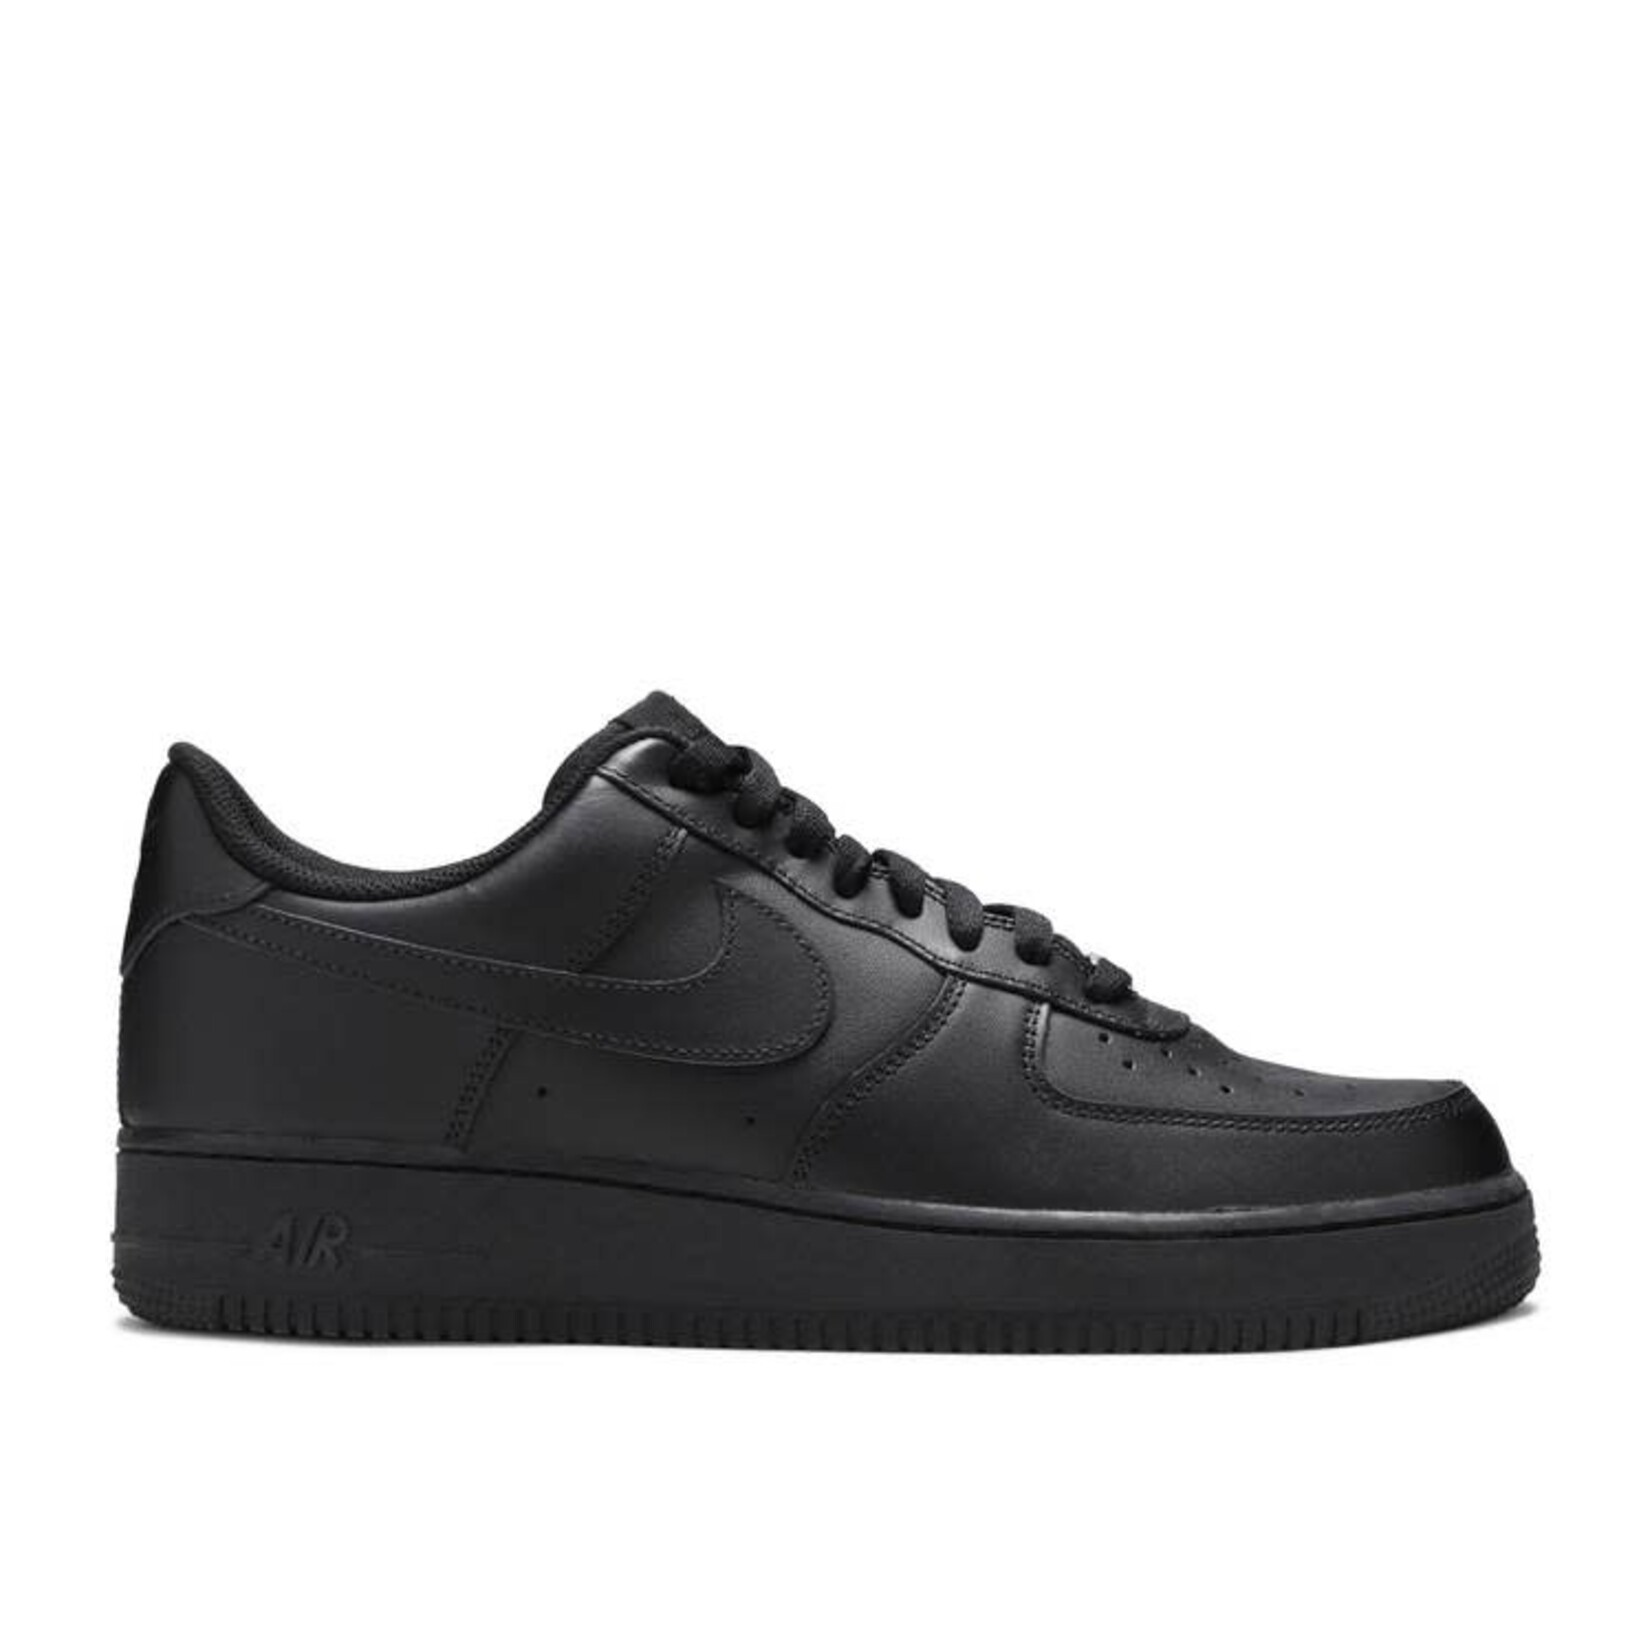 Nike Nike Air Force 1 Low '07 Black Size 11.5, DS BRAND NEW